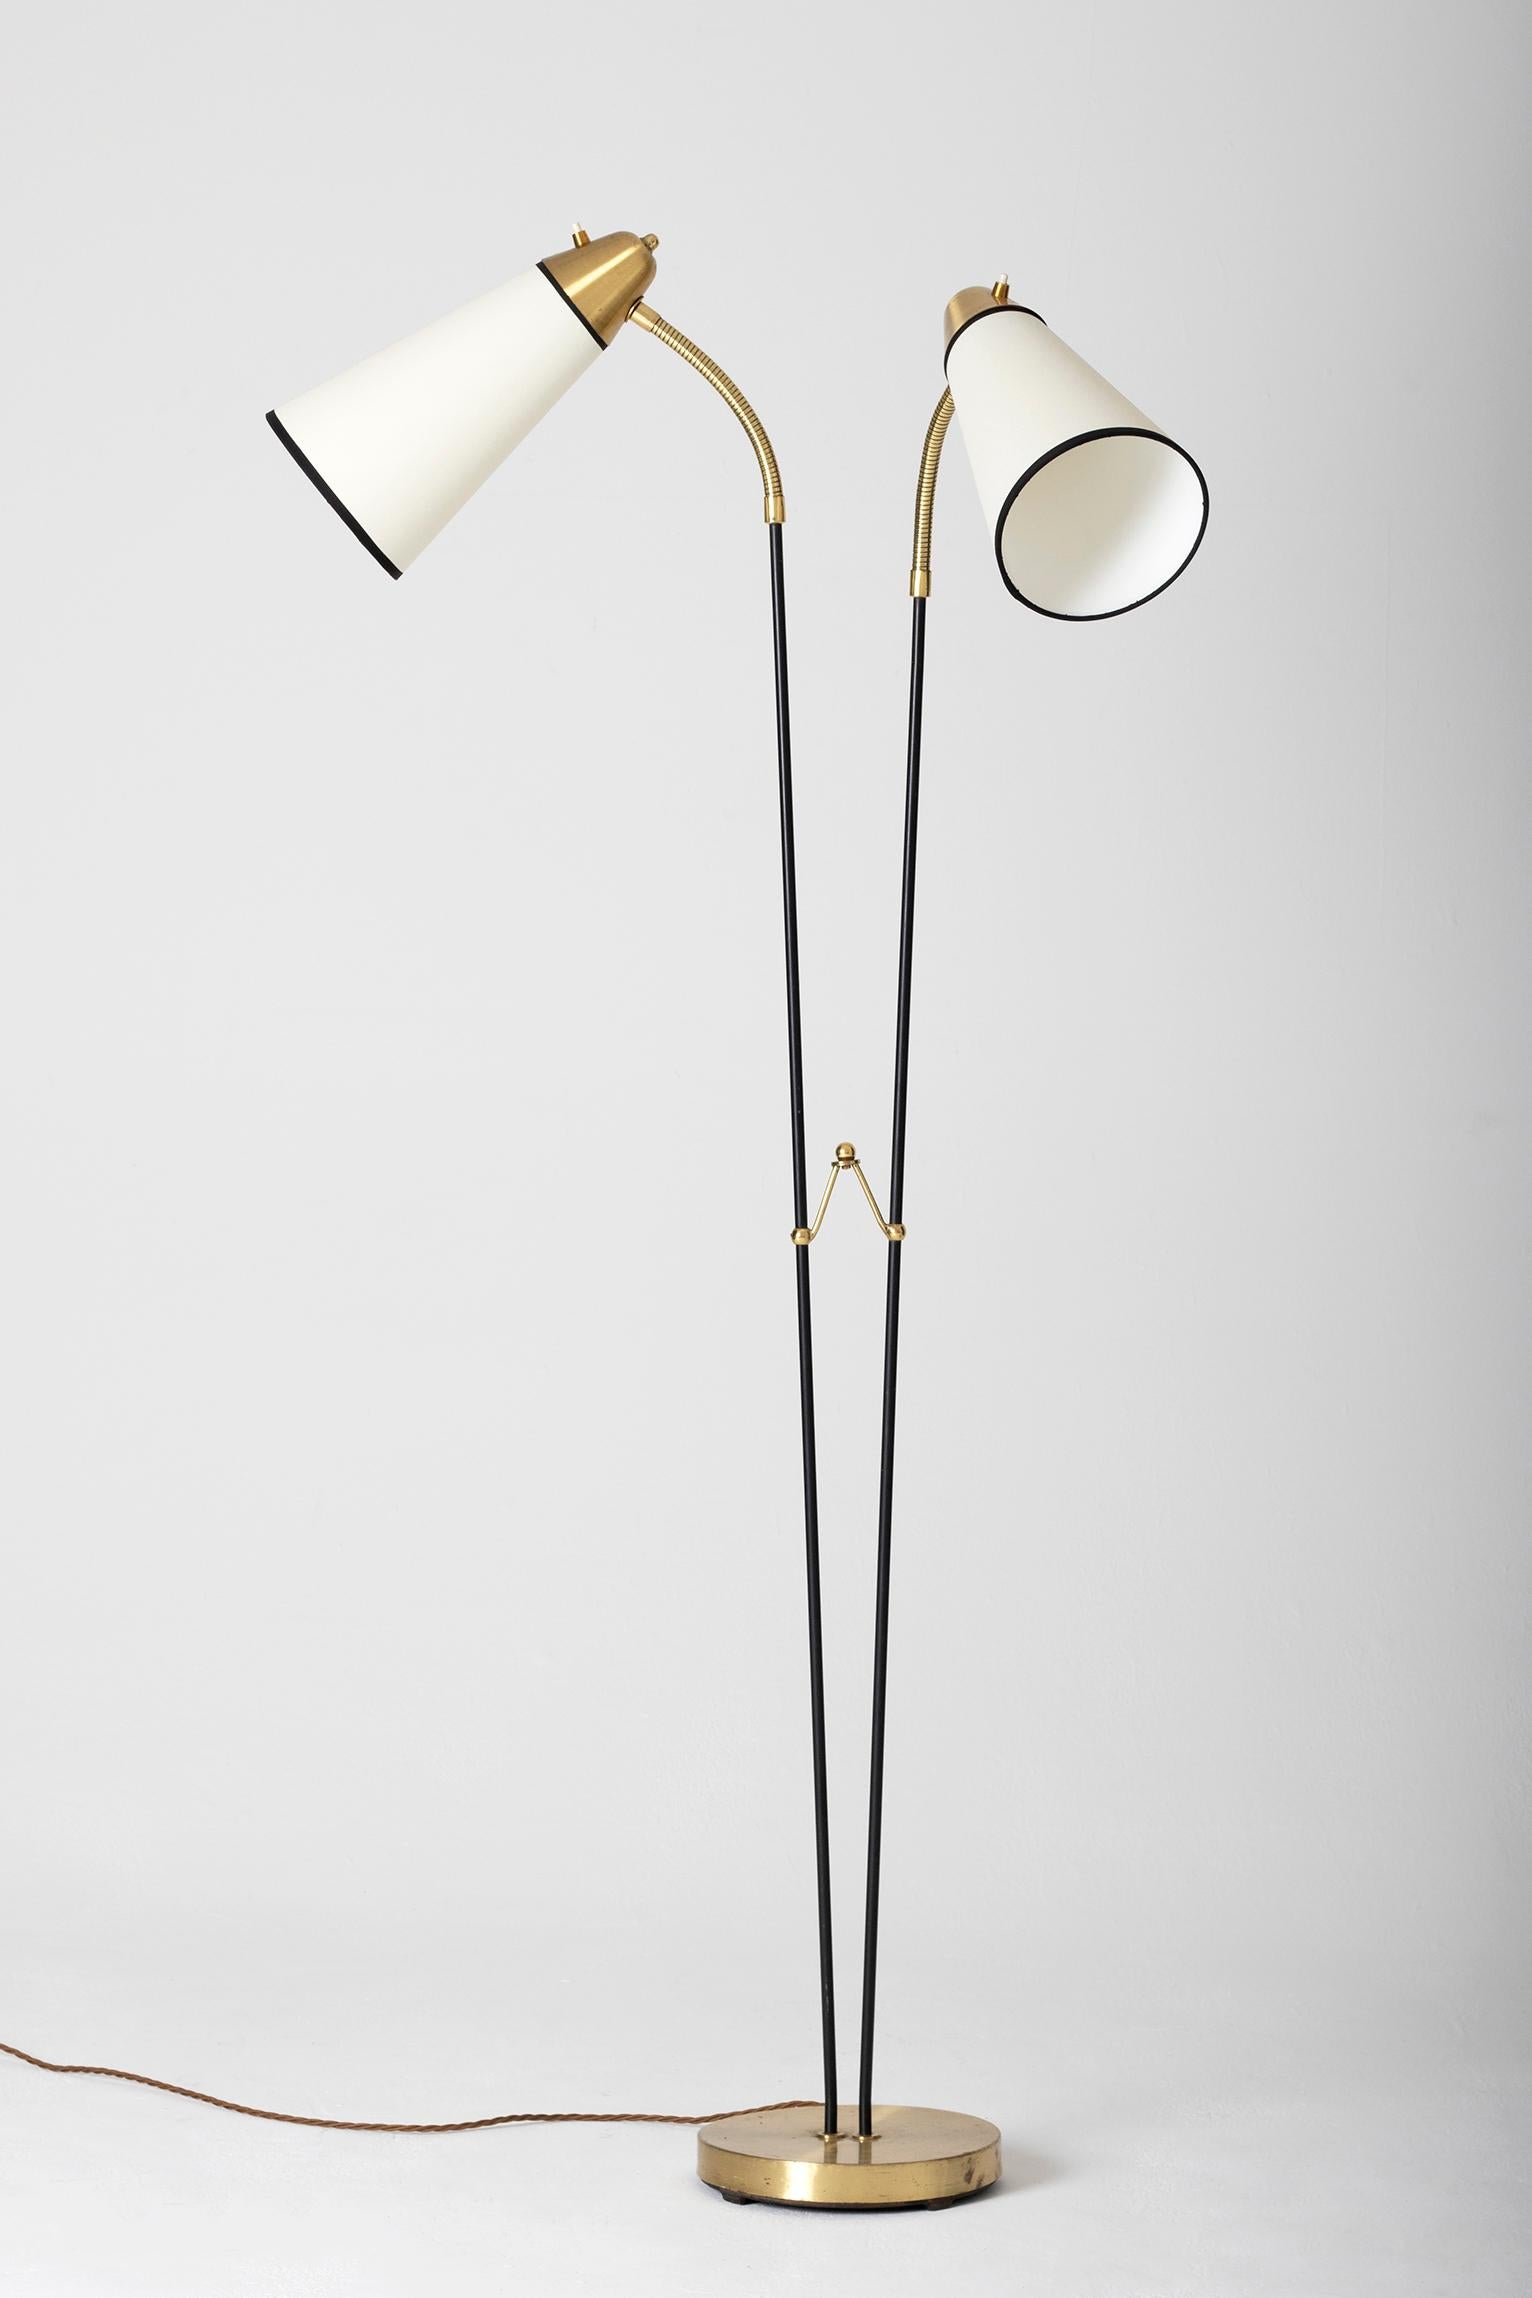 A brass and black enameled iron two-armed floor lamp, with bespoke shades
Sweden, third quarter of the 20th century.